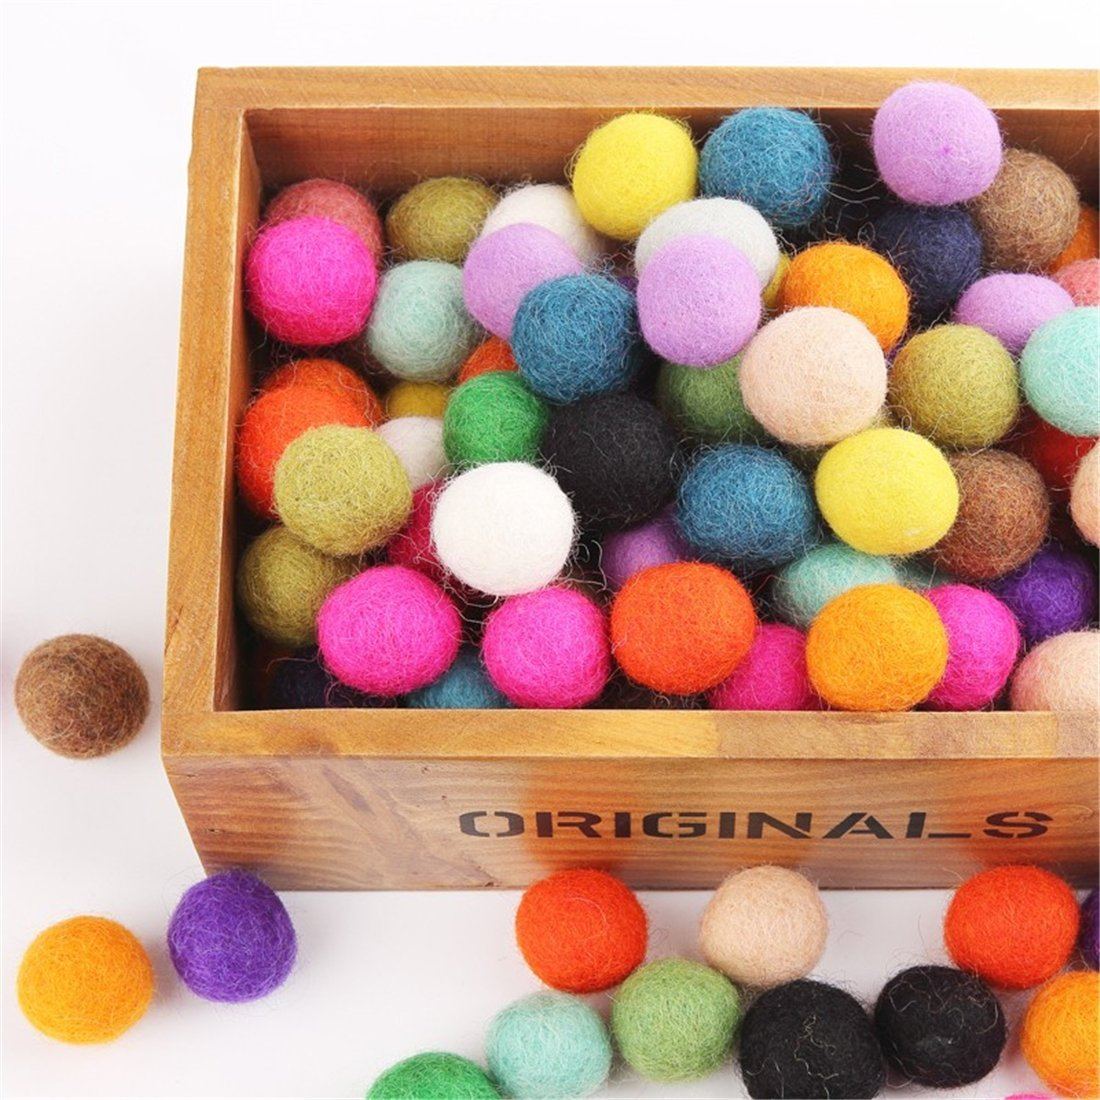 15 Stocking Stuffers for Crafters